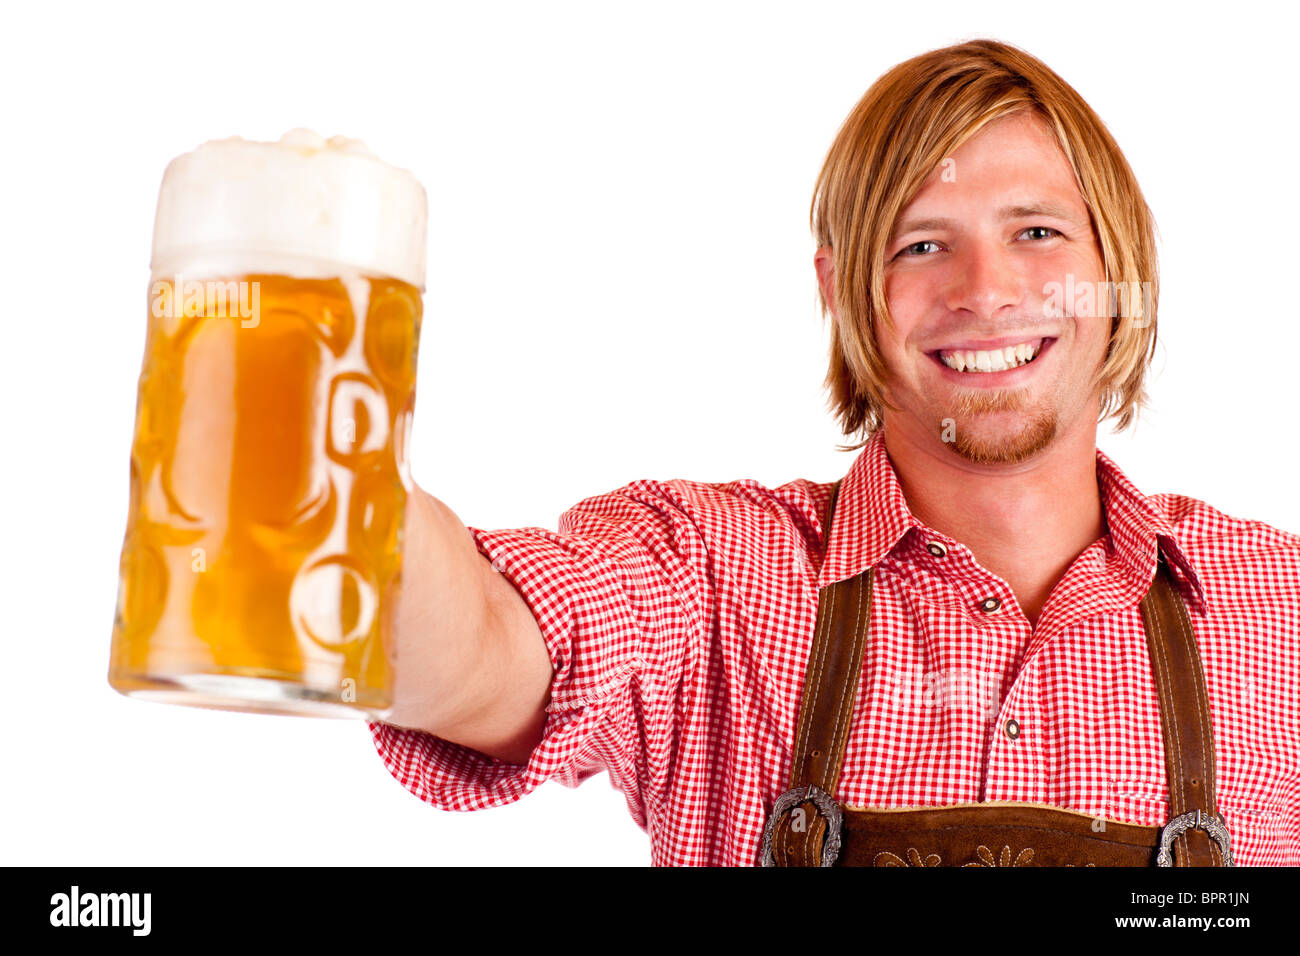 Happy smiling man with leather trousers (lederhose) holds Oktoberfest beer stein. Isolated on white background. Stock Photo